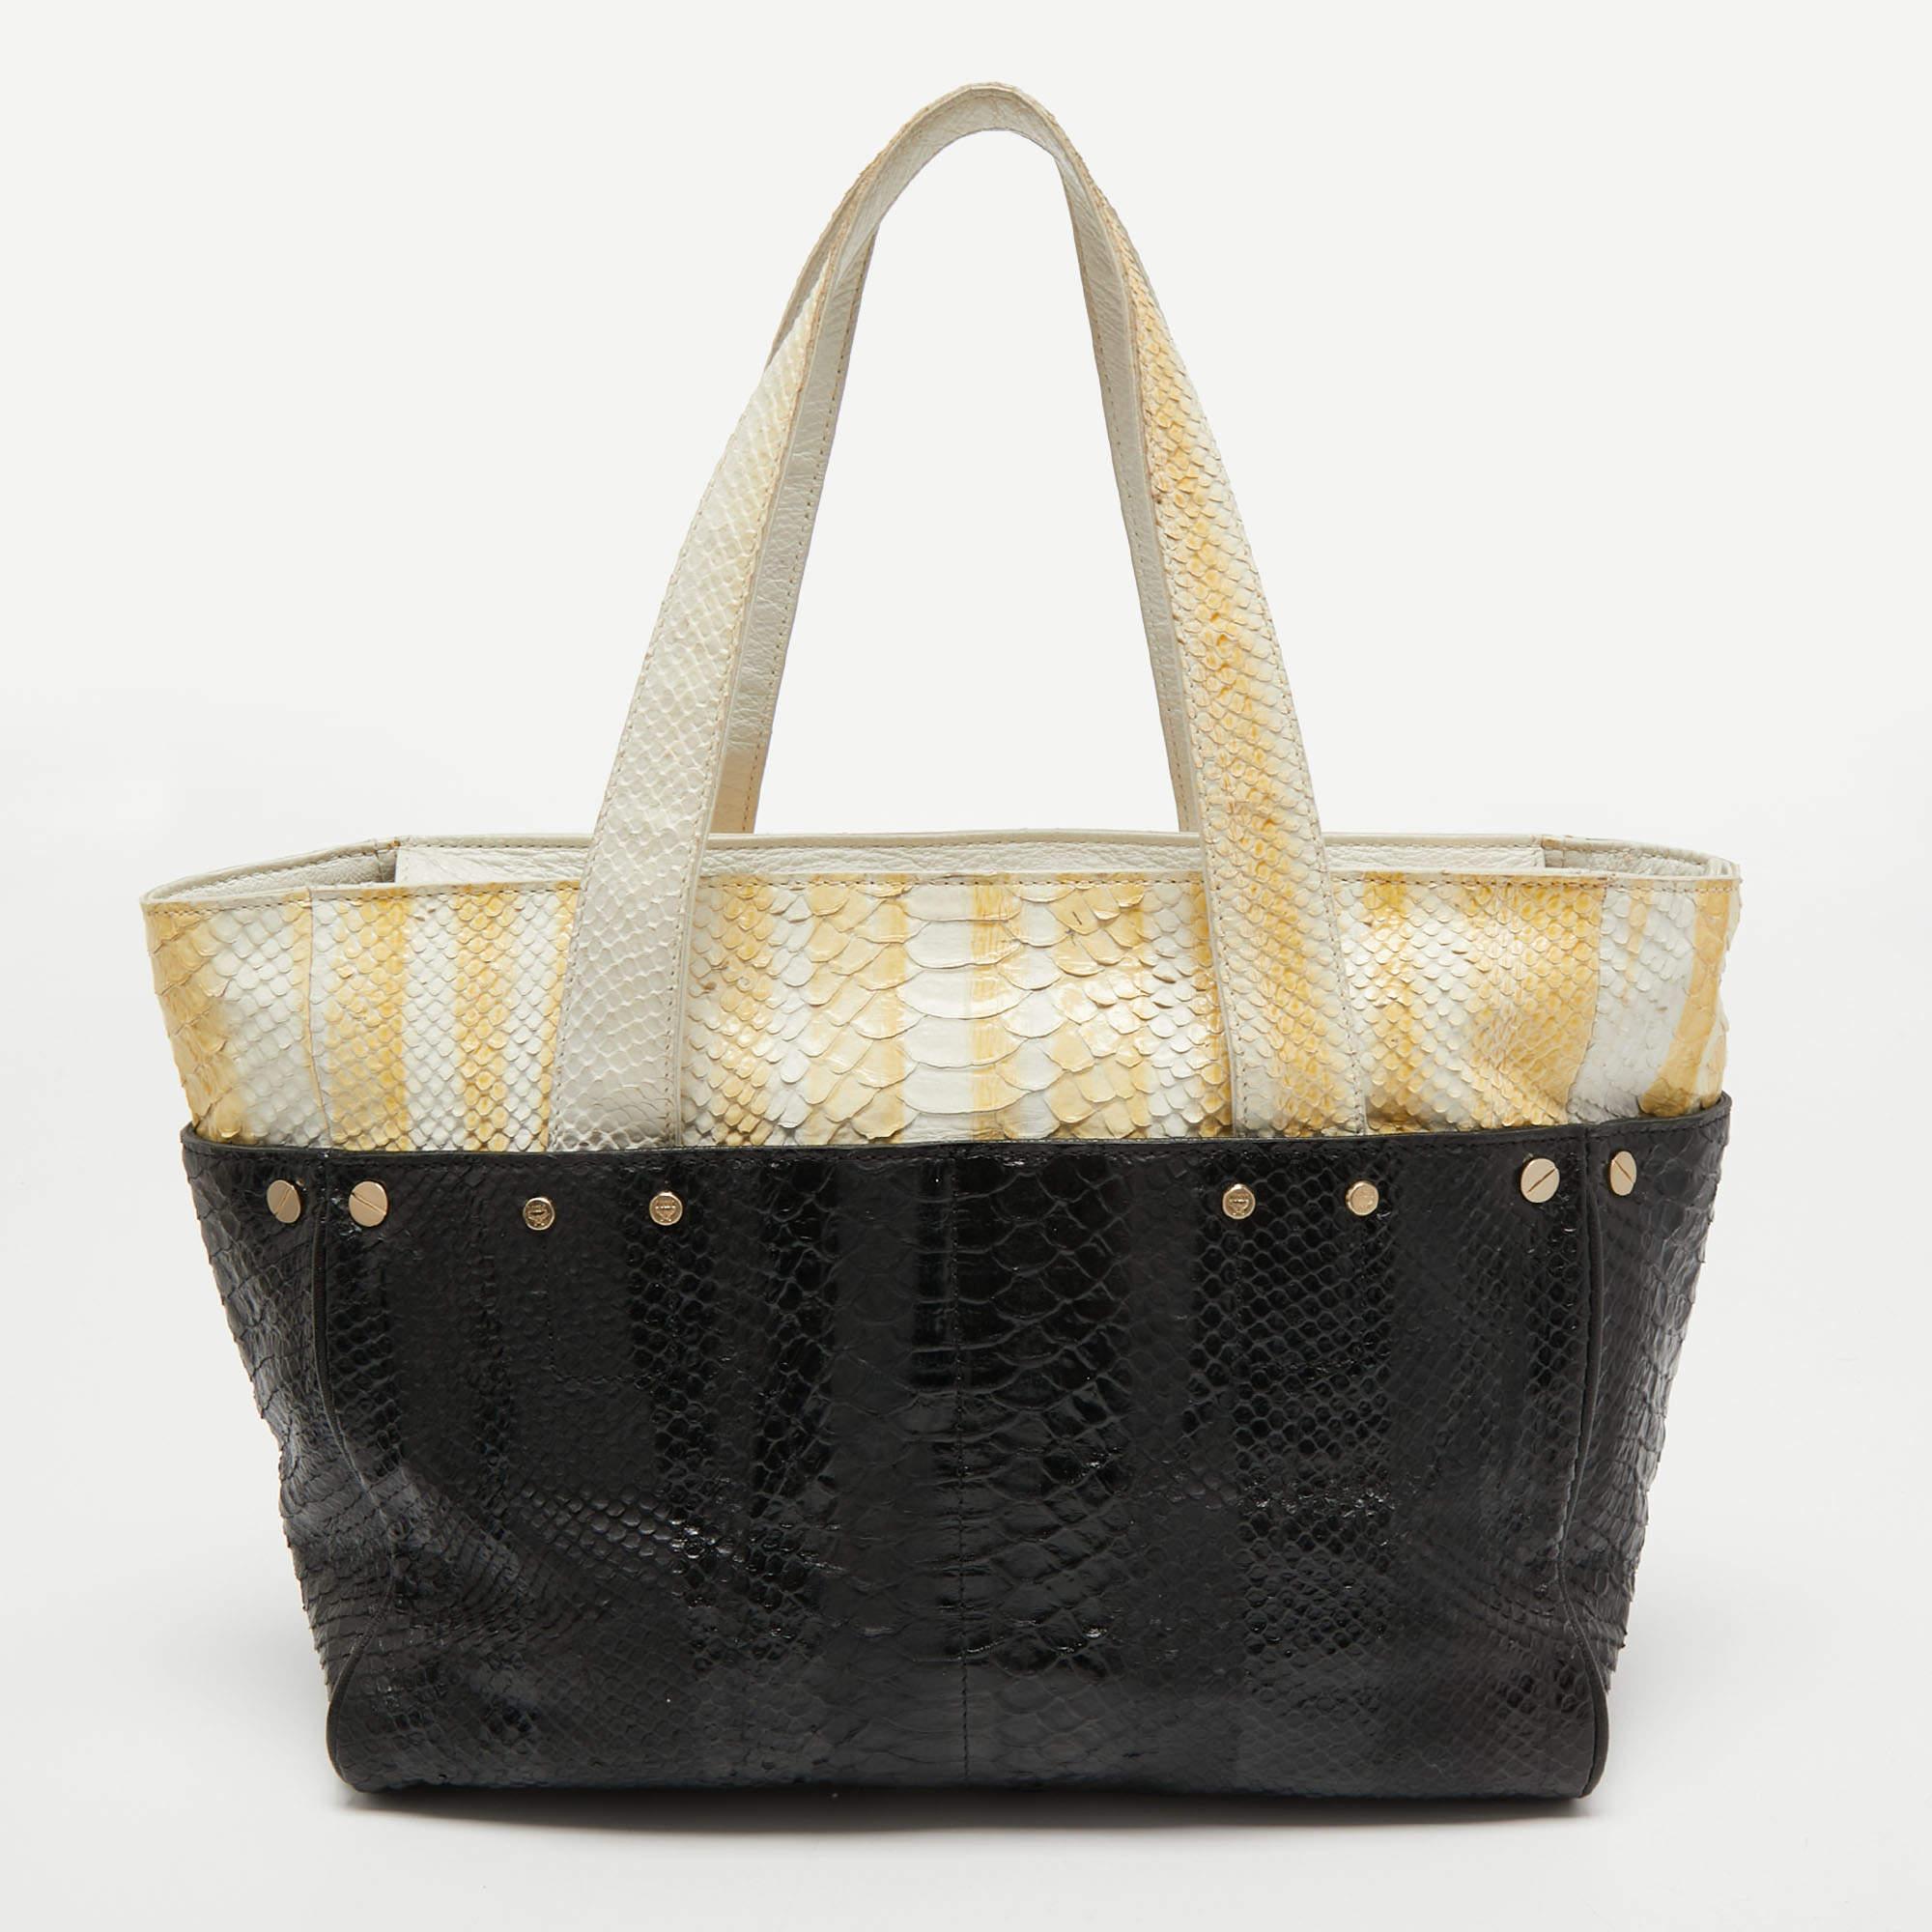 Carry everything you need in style thanks to this designer tote for women. Crafted from the best materials, this is an accessory that promises enduring style and usage.

